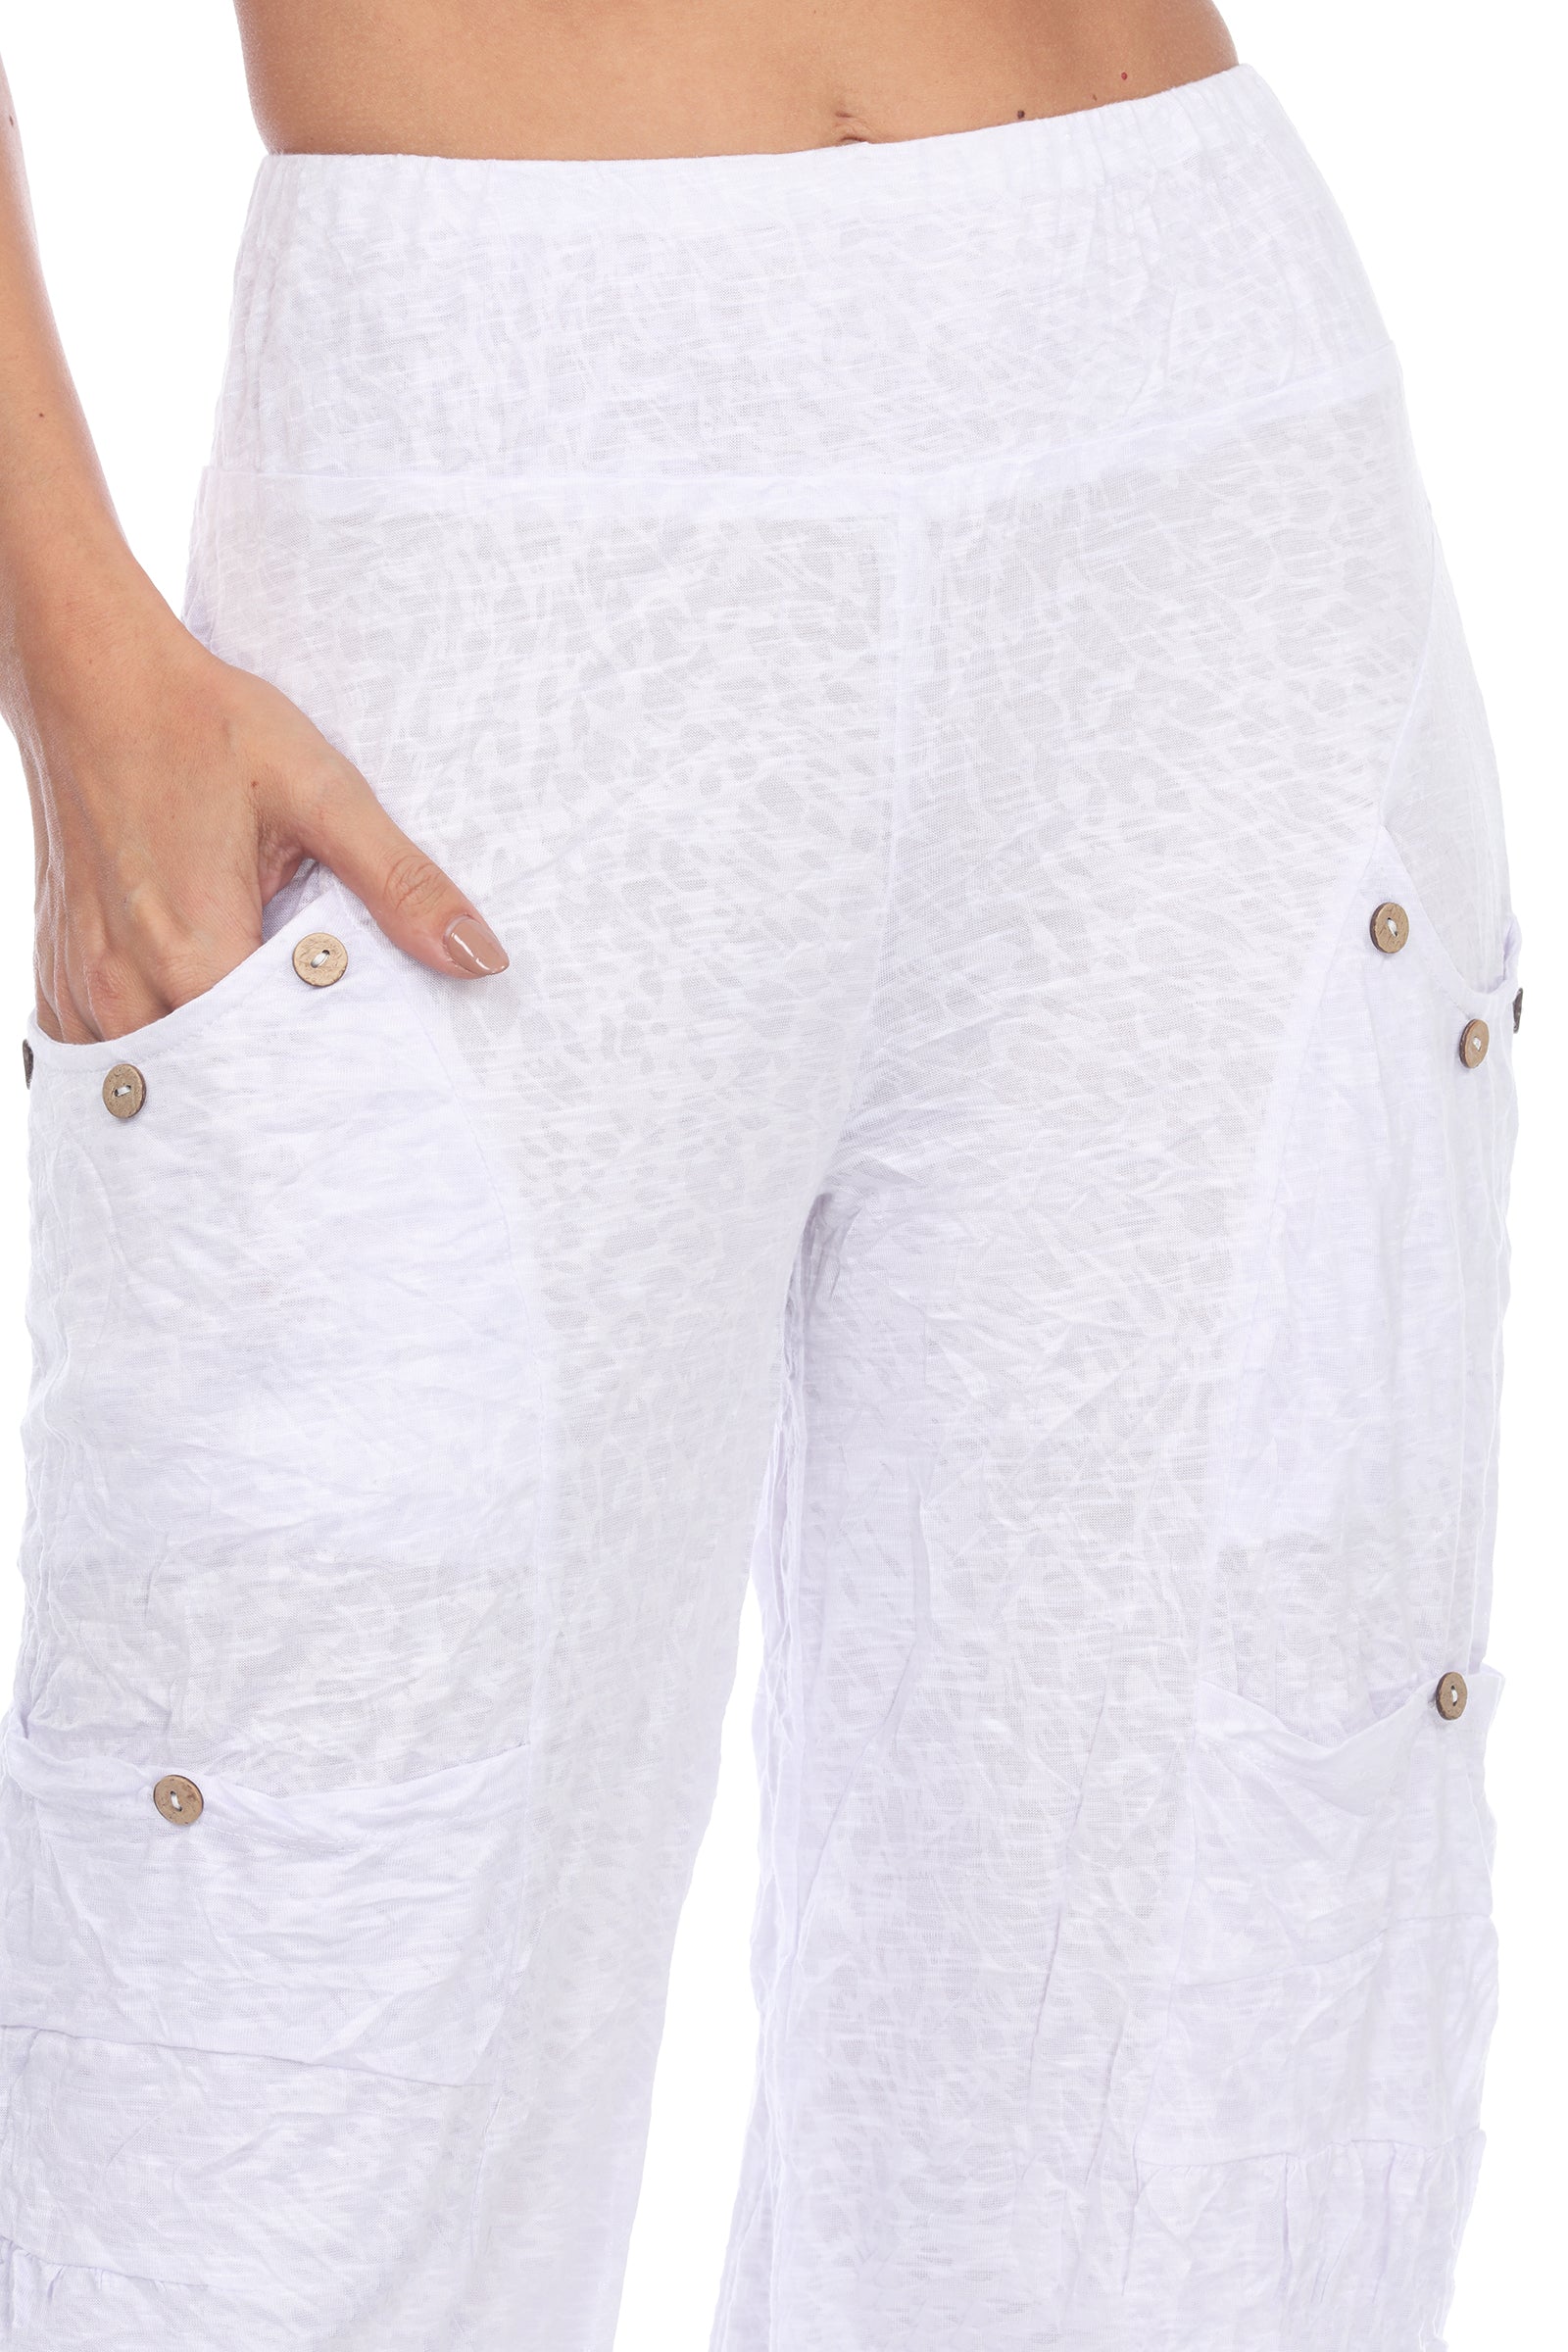 Pocket Pant w/ Buttons - CARINE